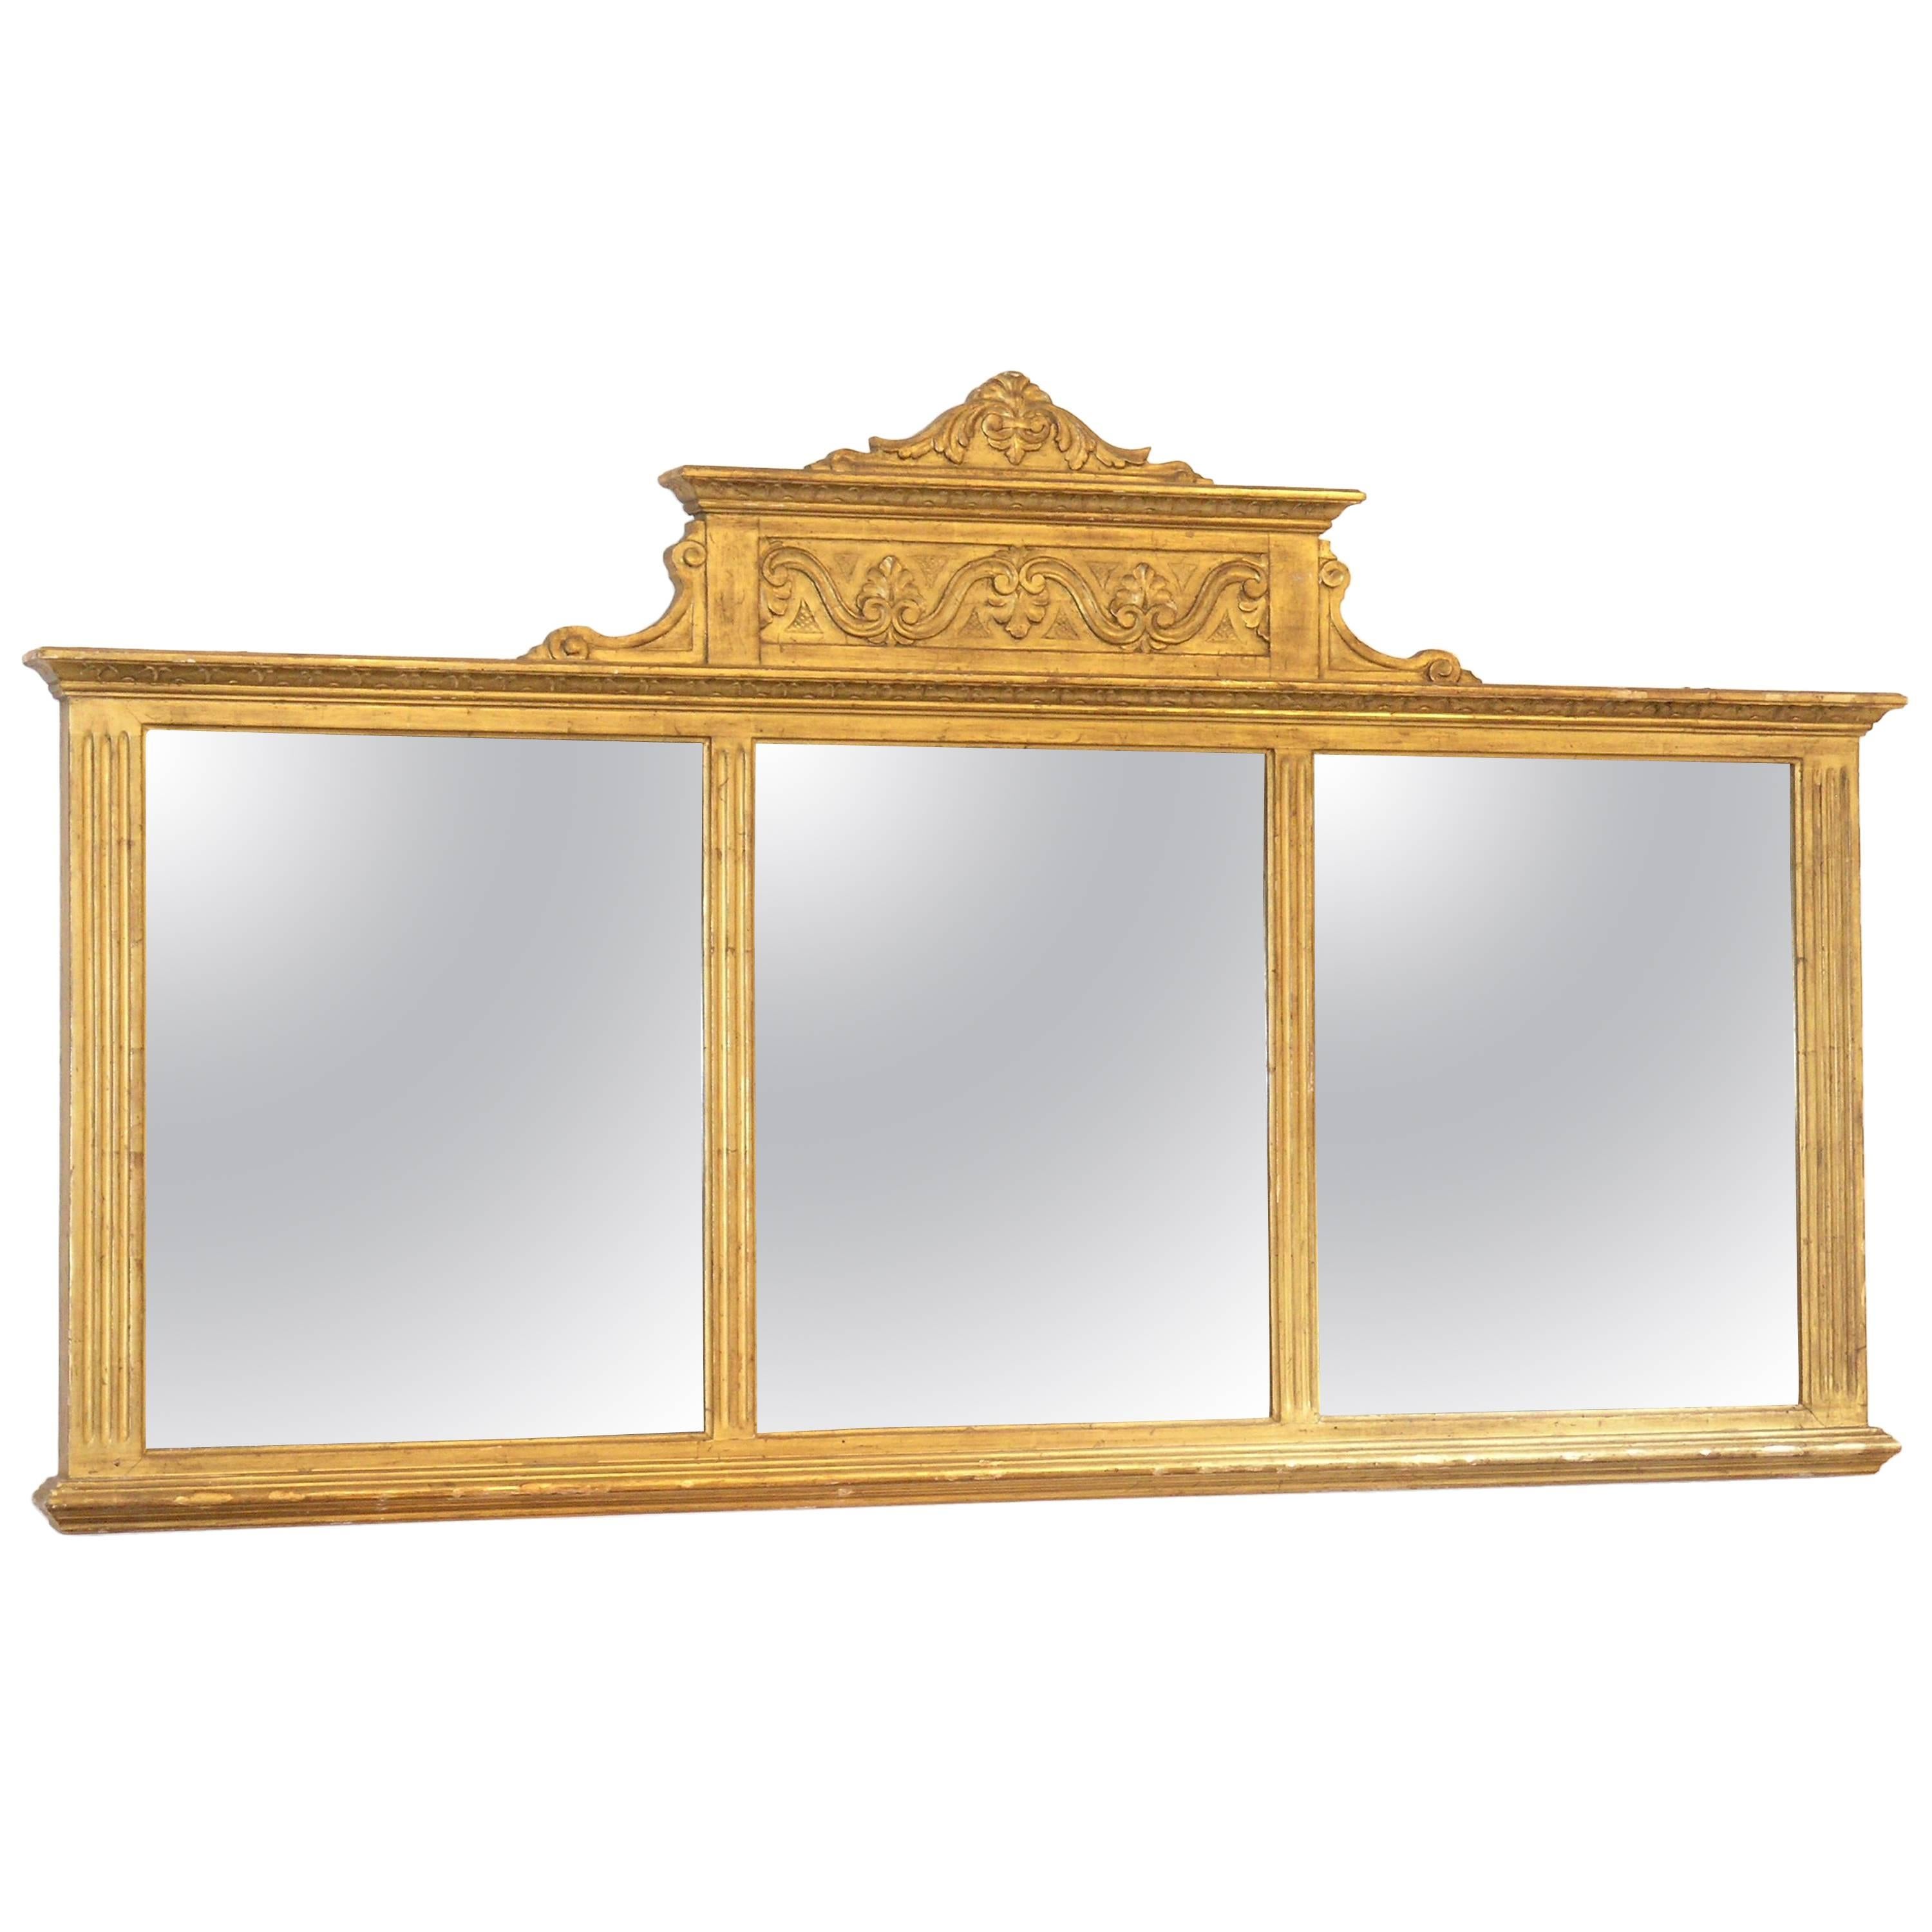 Neoclassical Overmantel Mirror For Sale